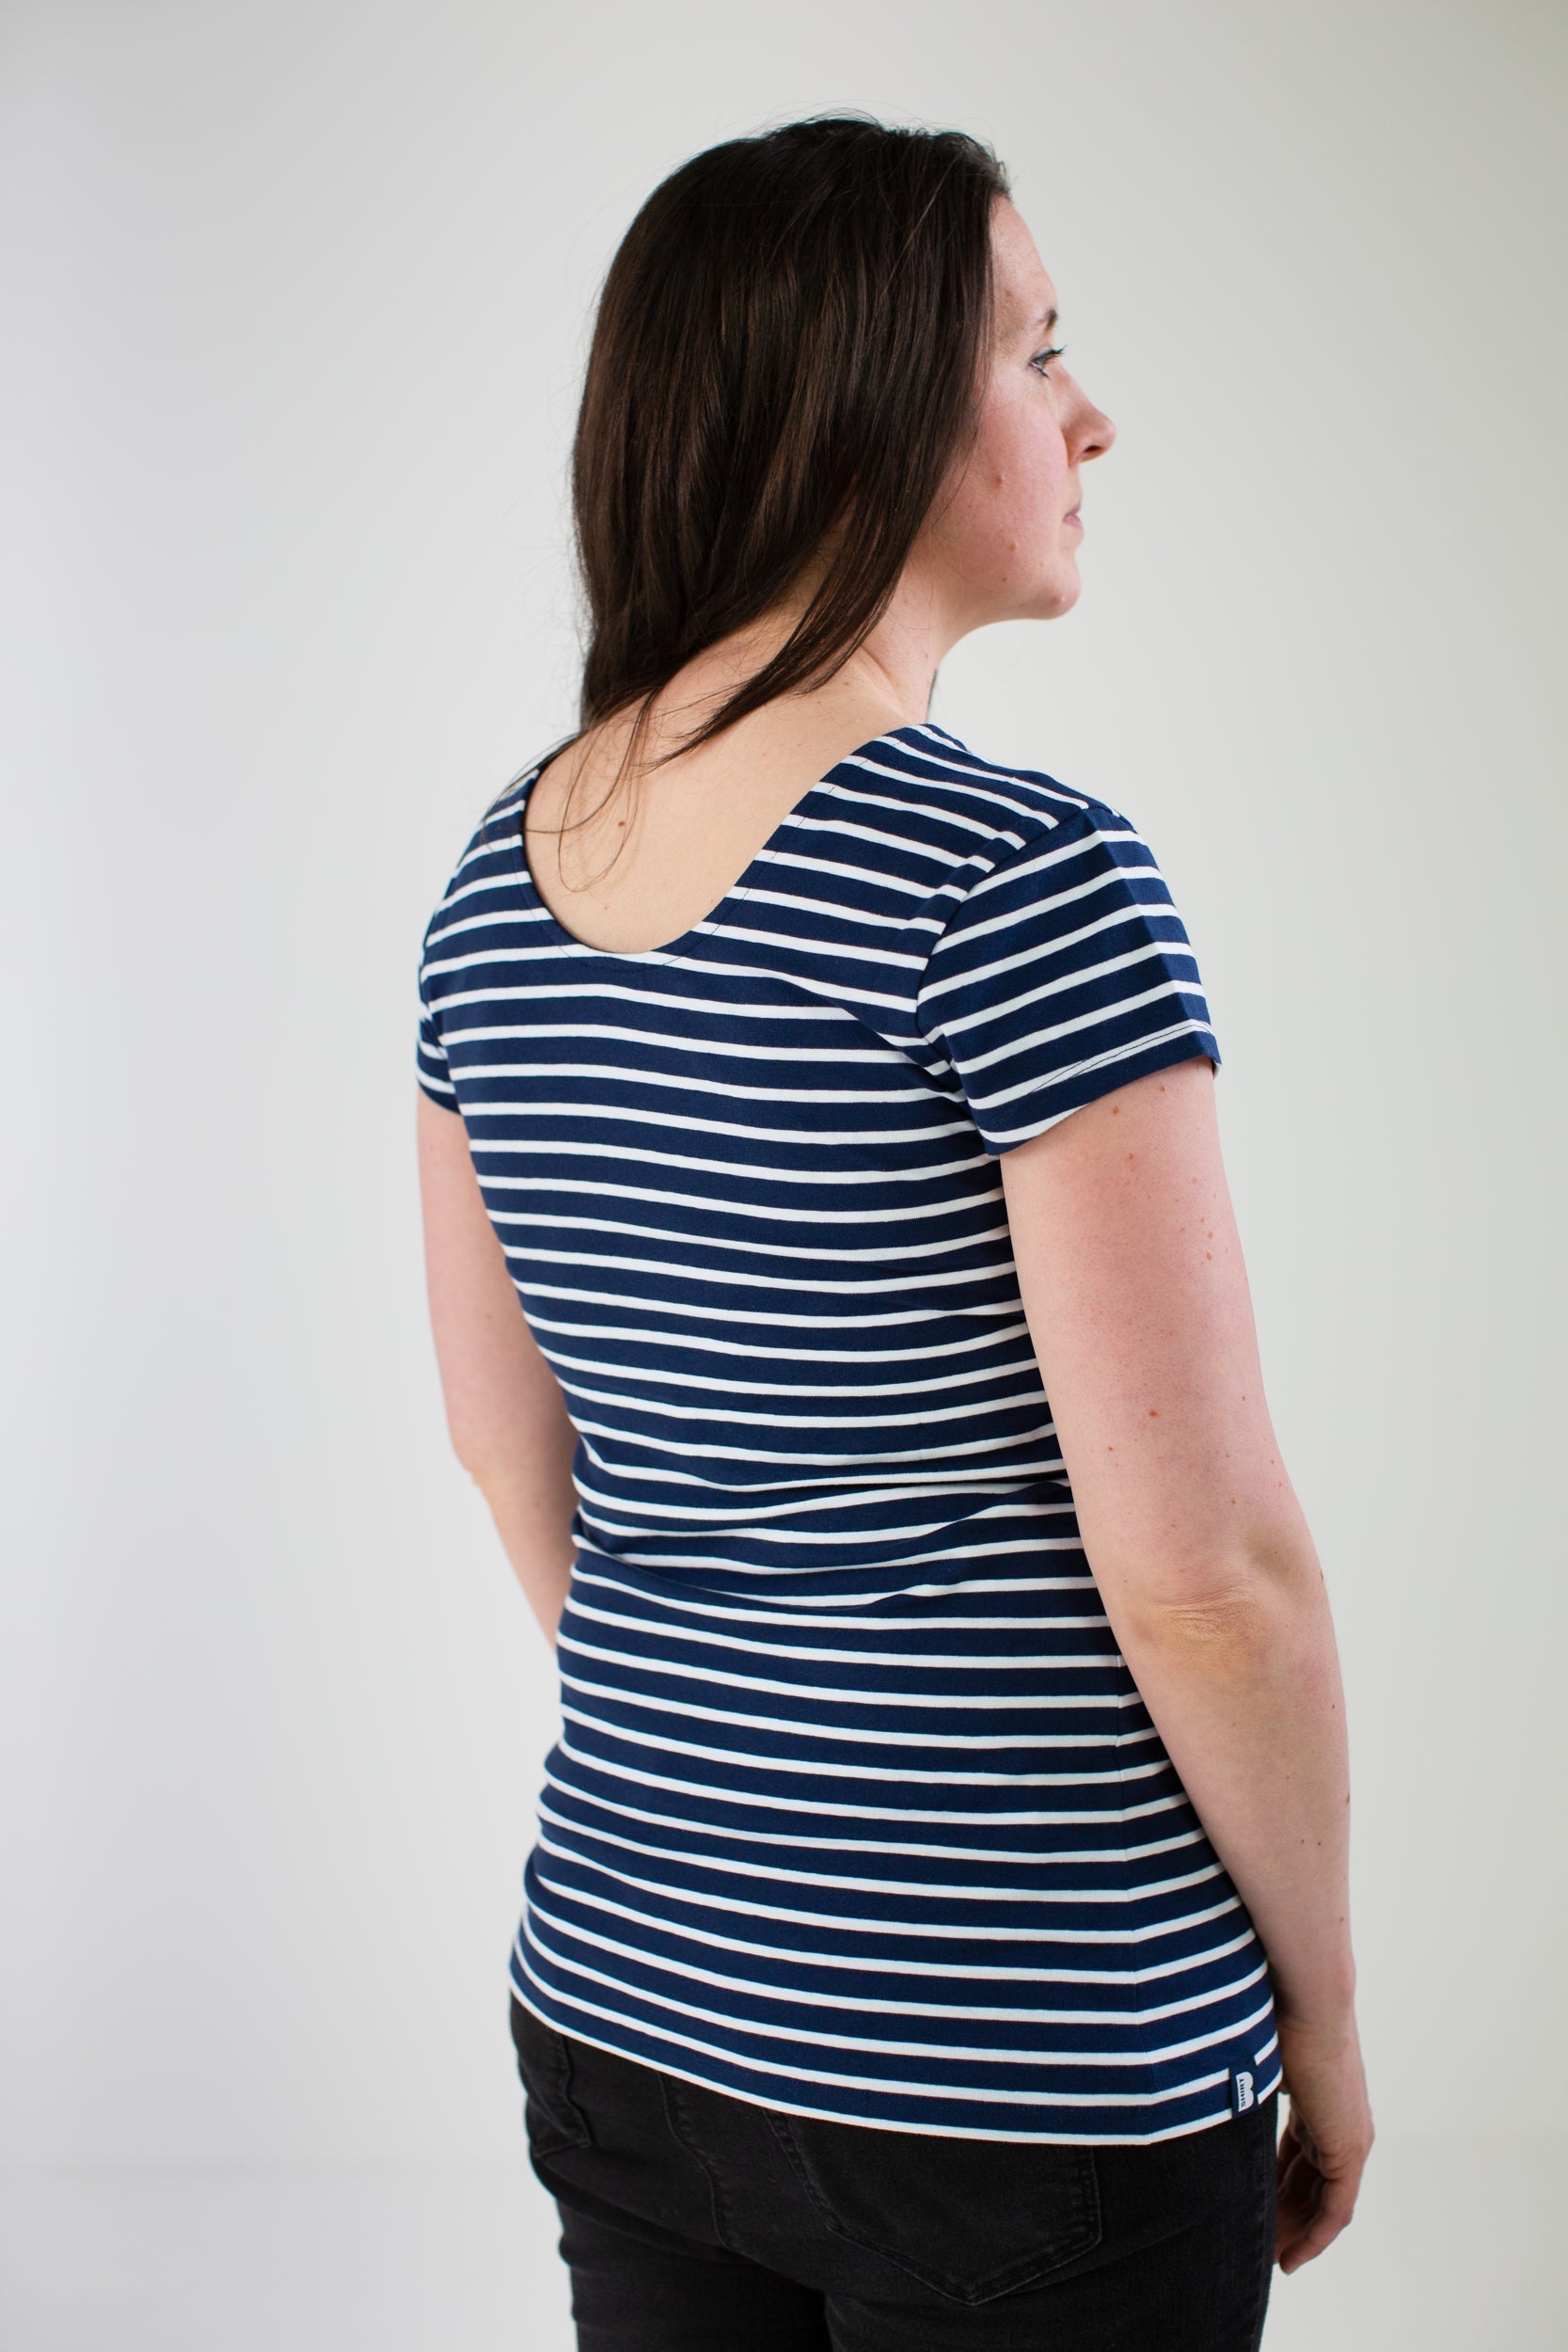 Nursing T-shirt in Navy with White Stripes back view